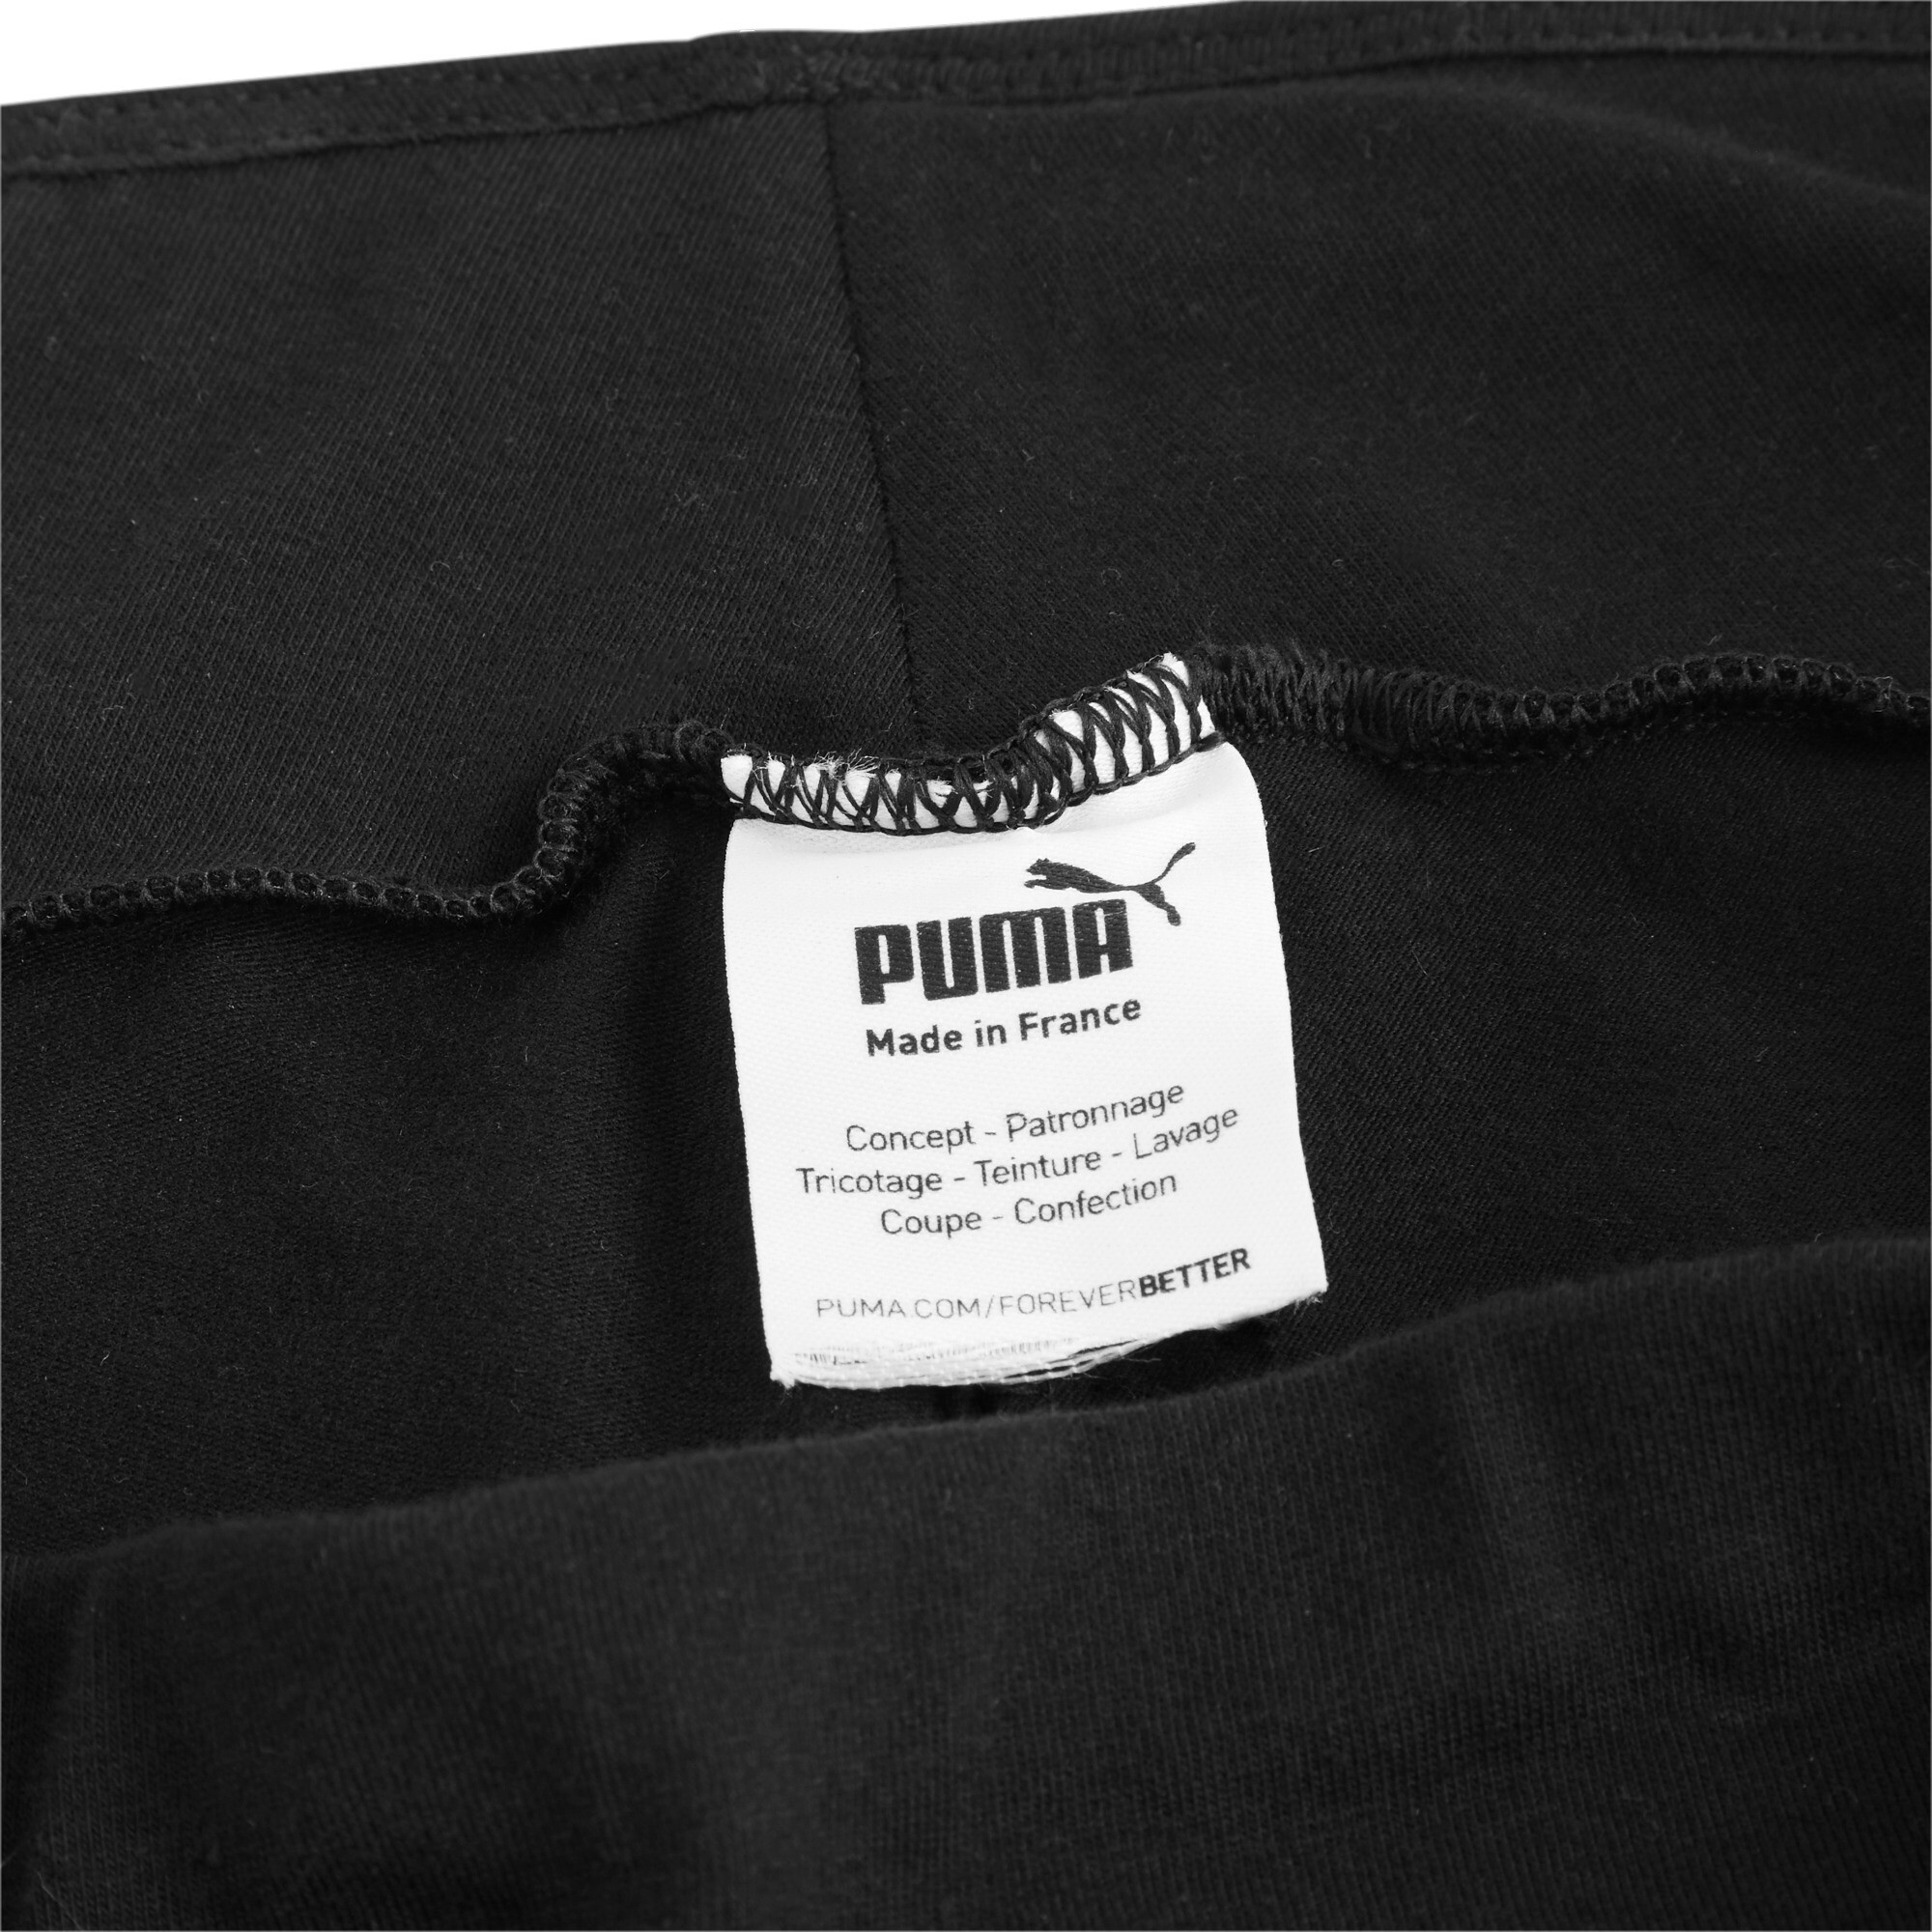 Women's Puma Made In France Leggings, Black, Size L, Clothing